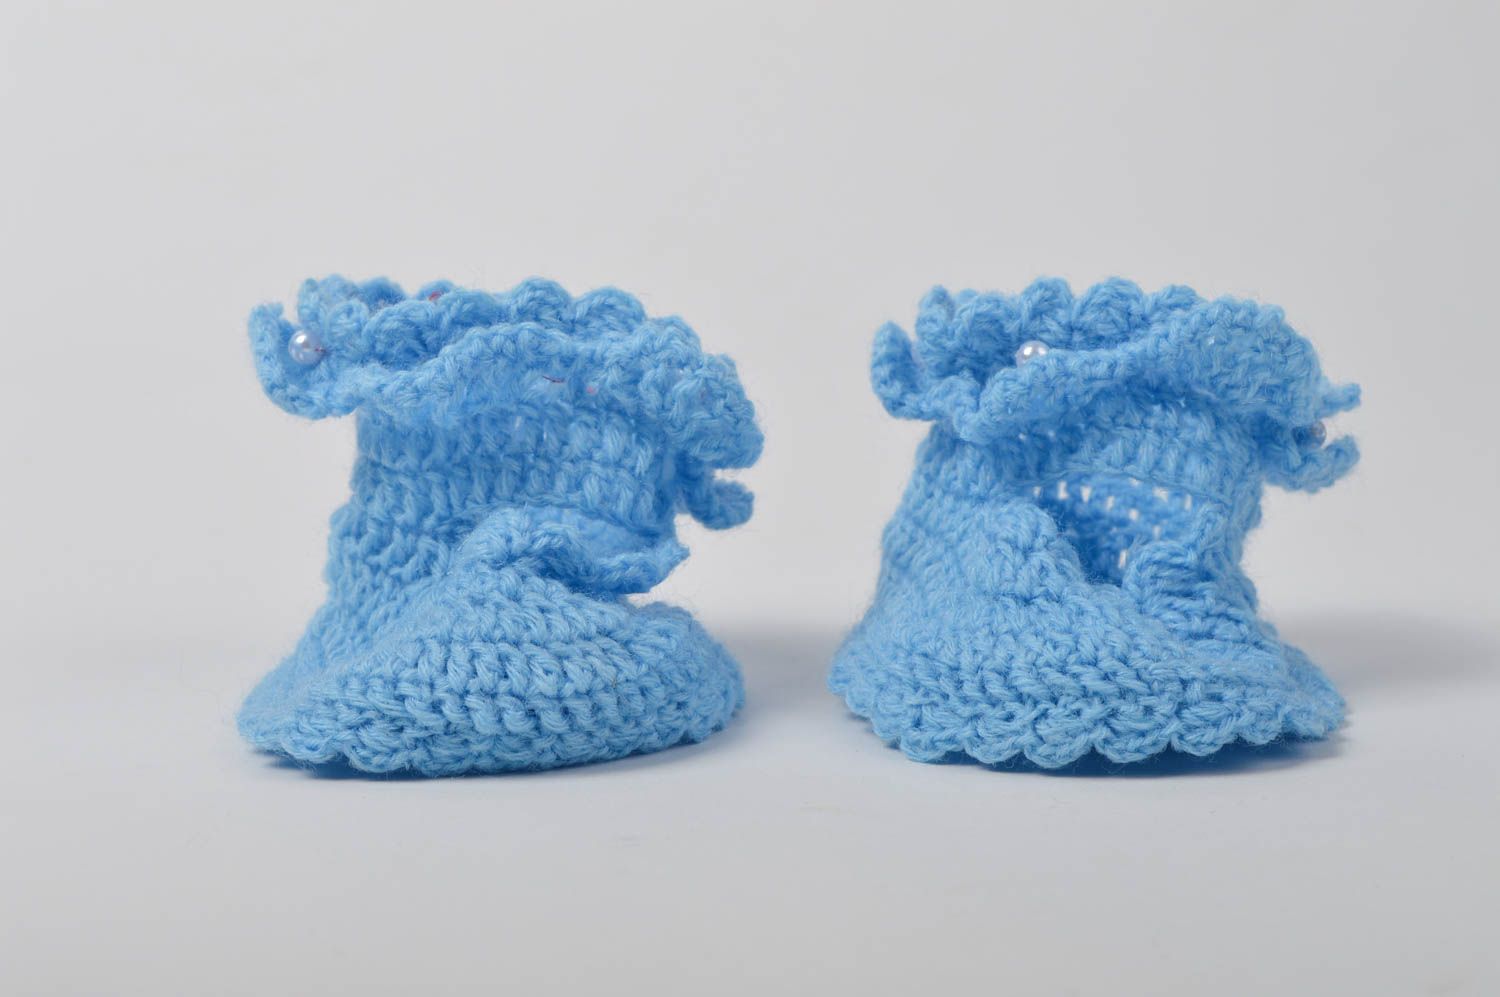 Crocheted booties for babies knitted socks crochet booties for baby unusual gift photo 2